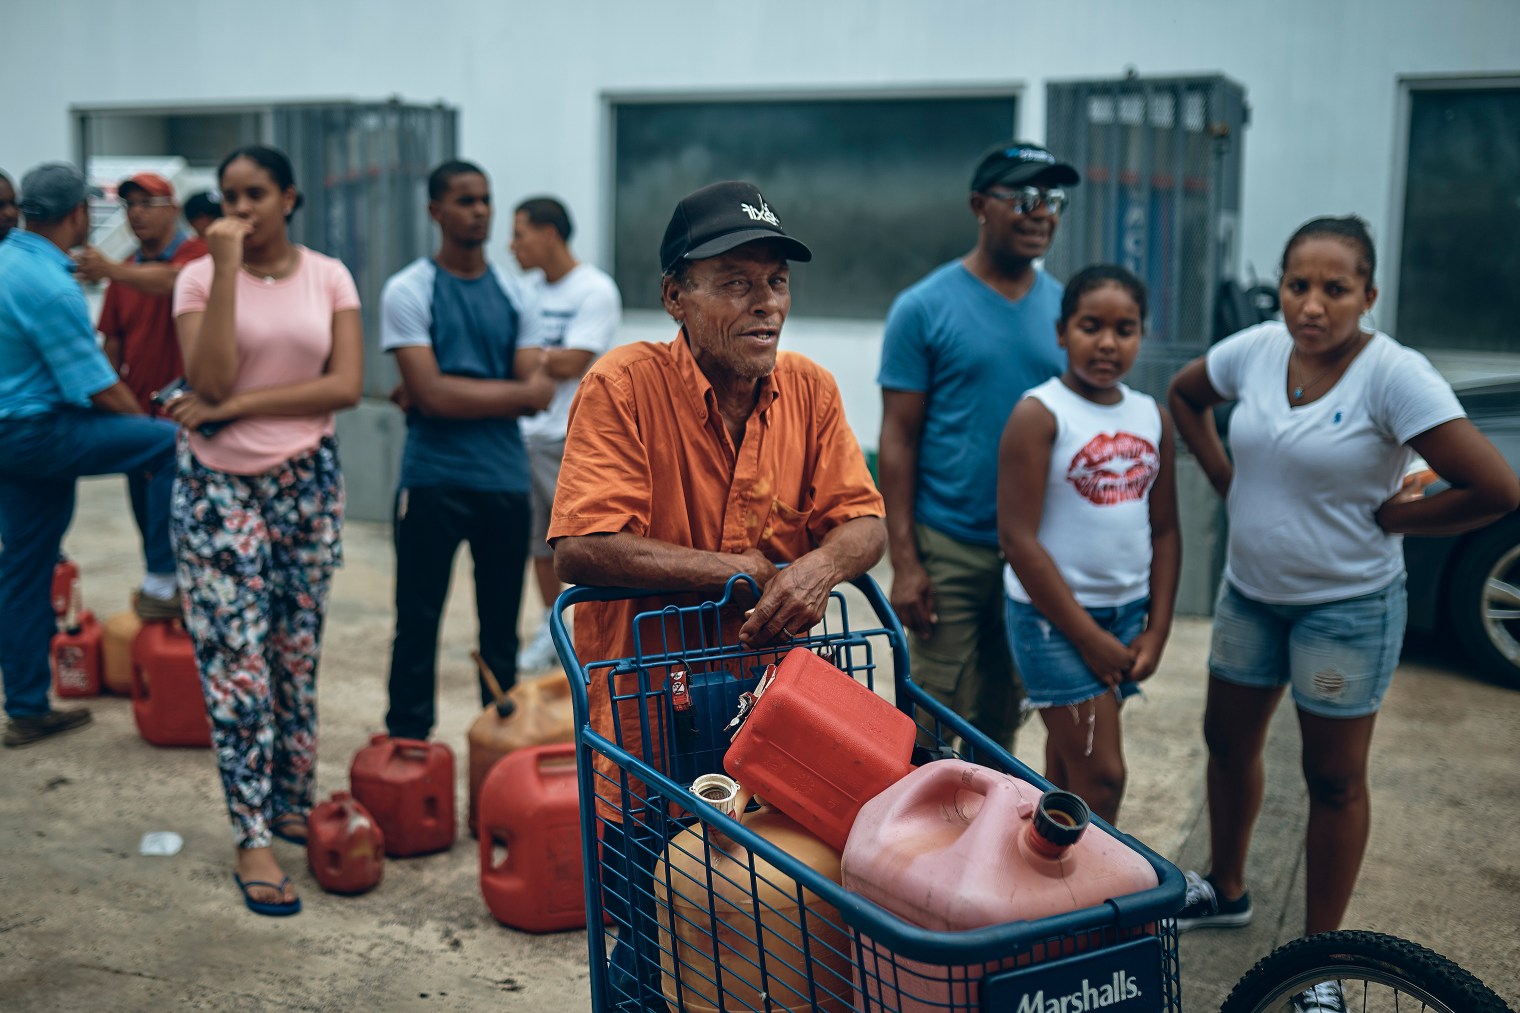 People wait in line to get fuel from a gas station in San Juan, Puerto Rico, on Sept. 30, 2017.